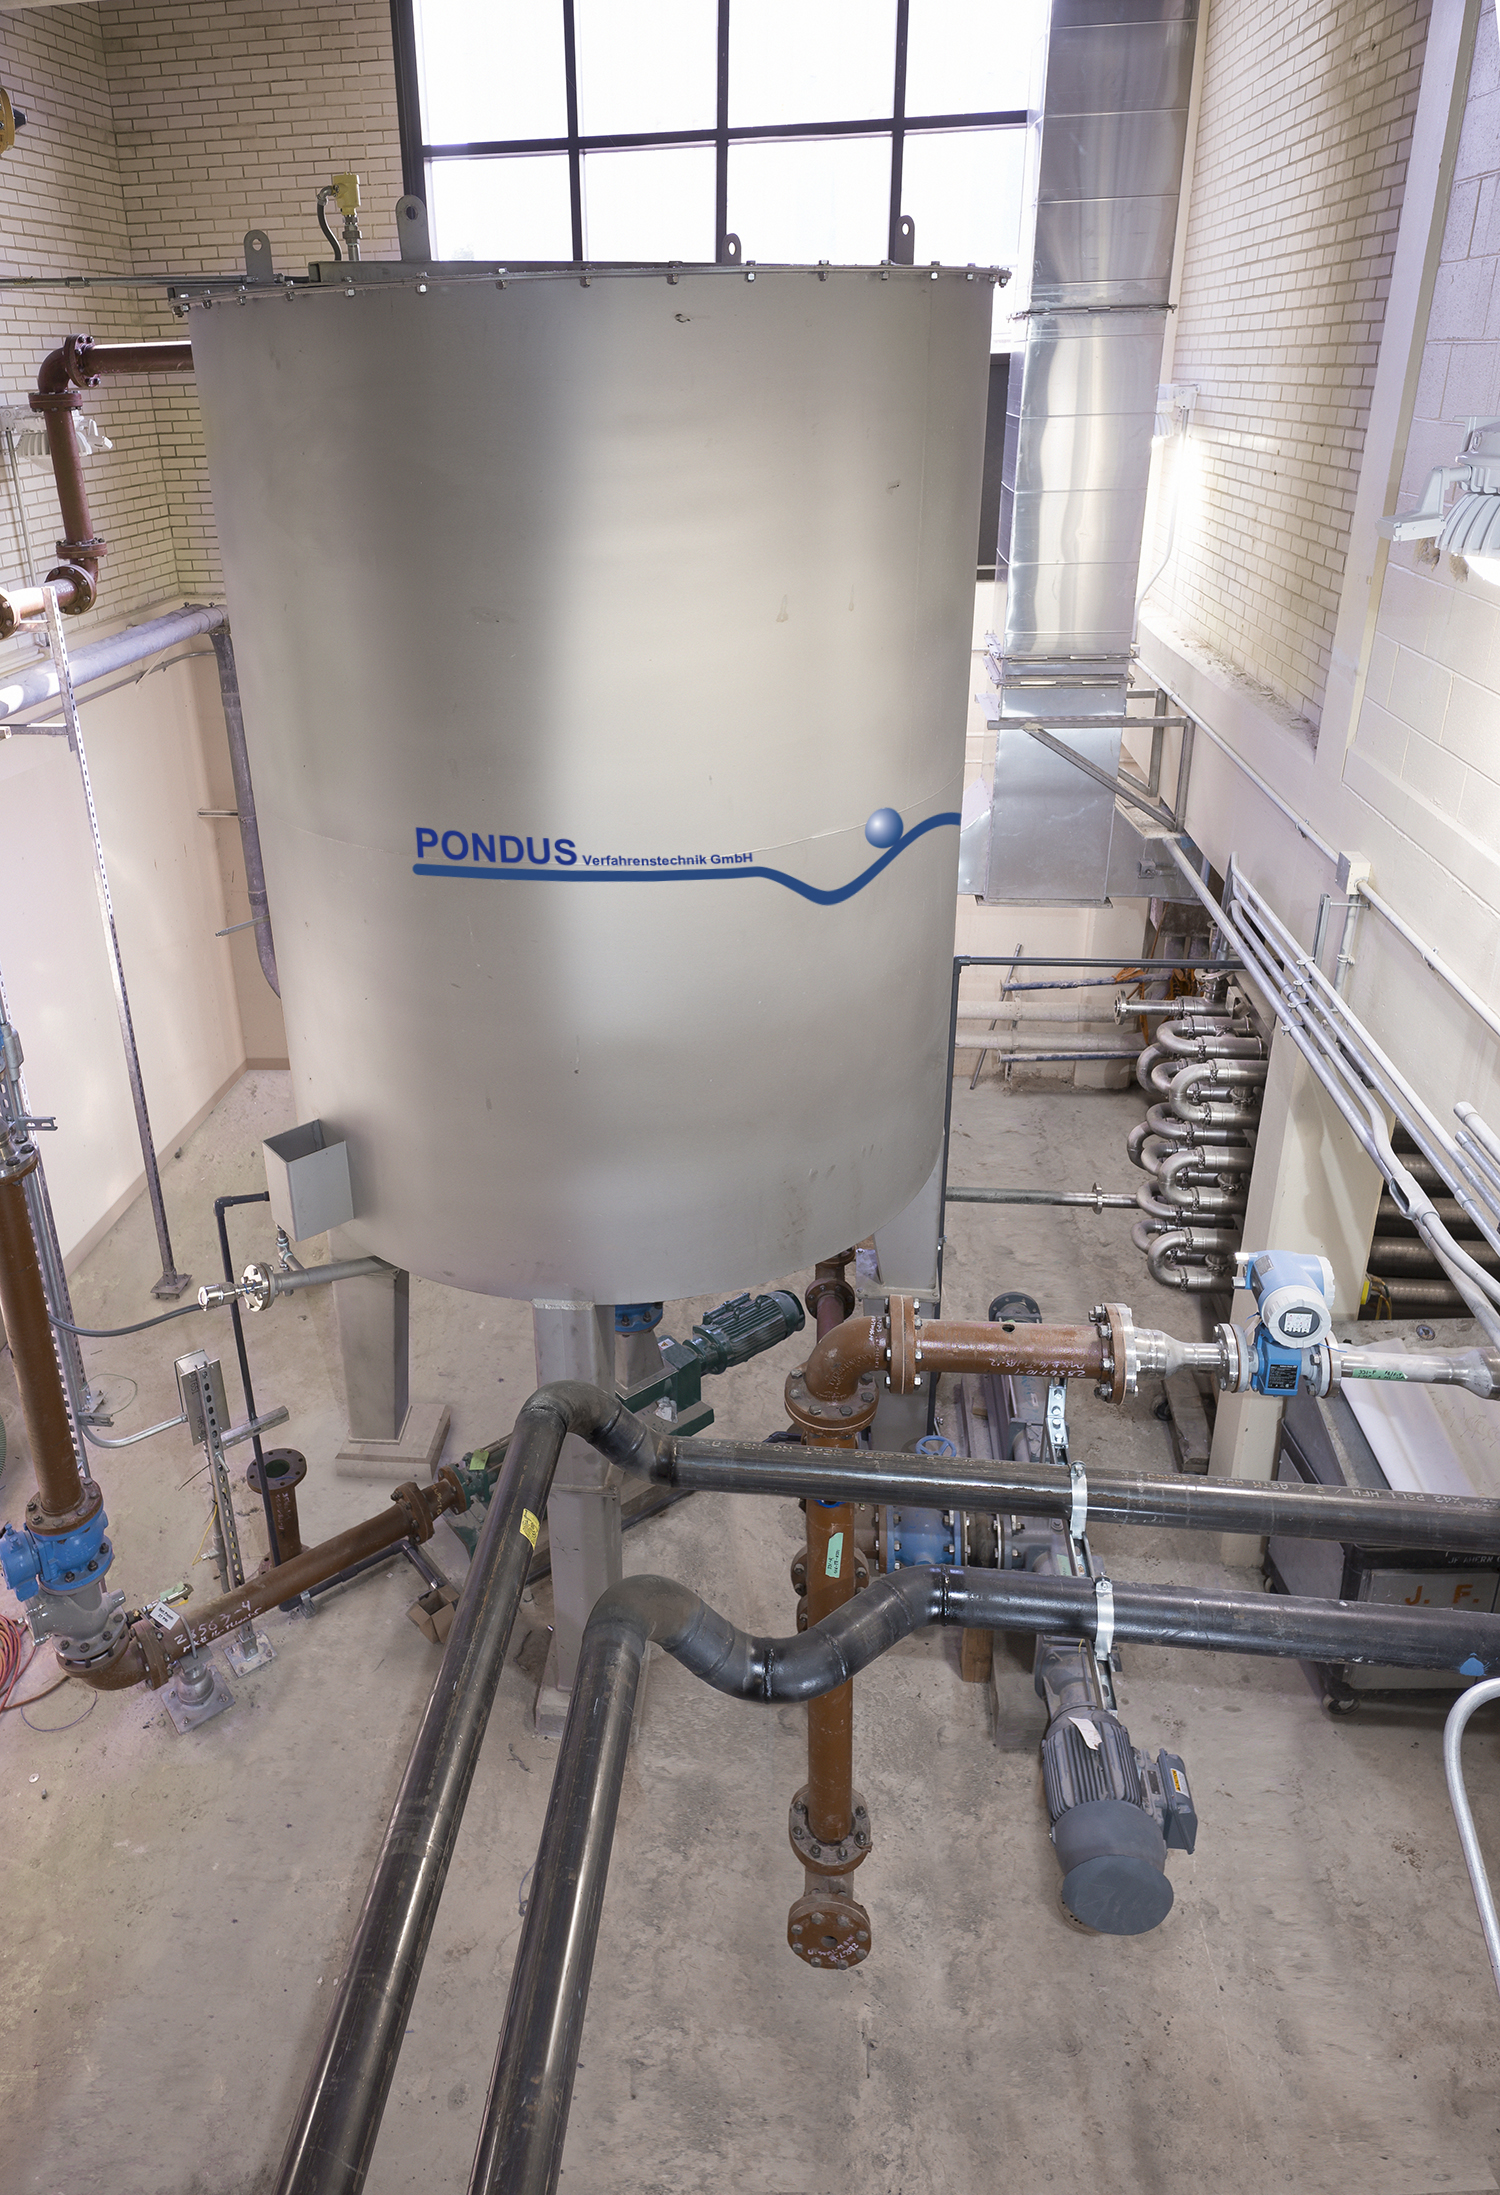 PONDUS TCHP helps to increase the sustainability of anaerobic digestion and enhance the thermal hydrolysis process.